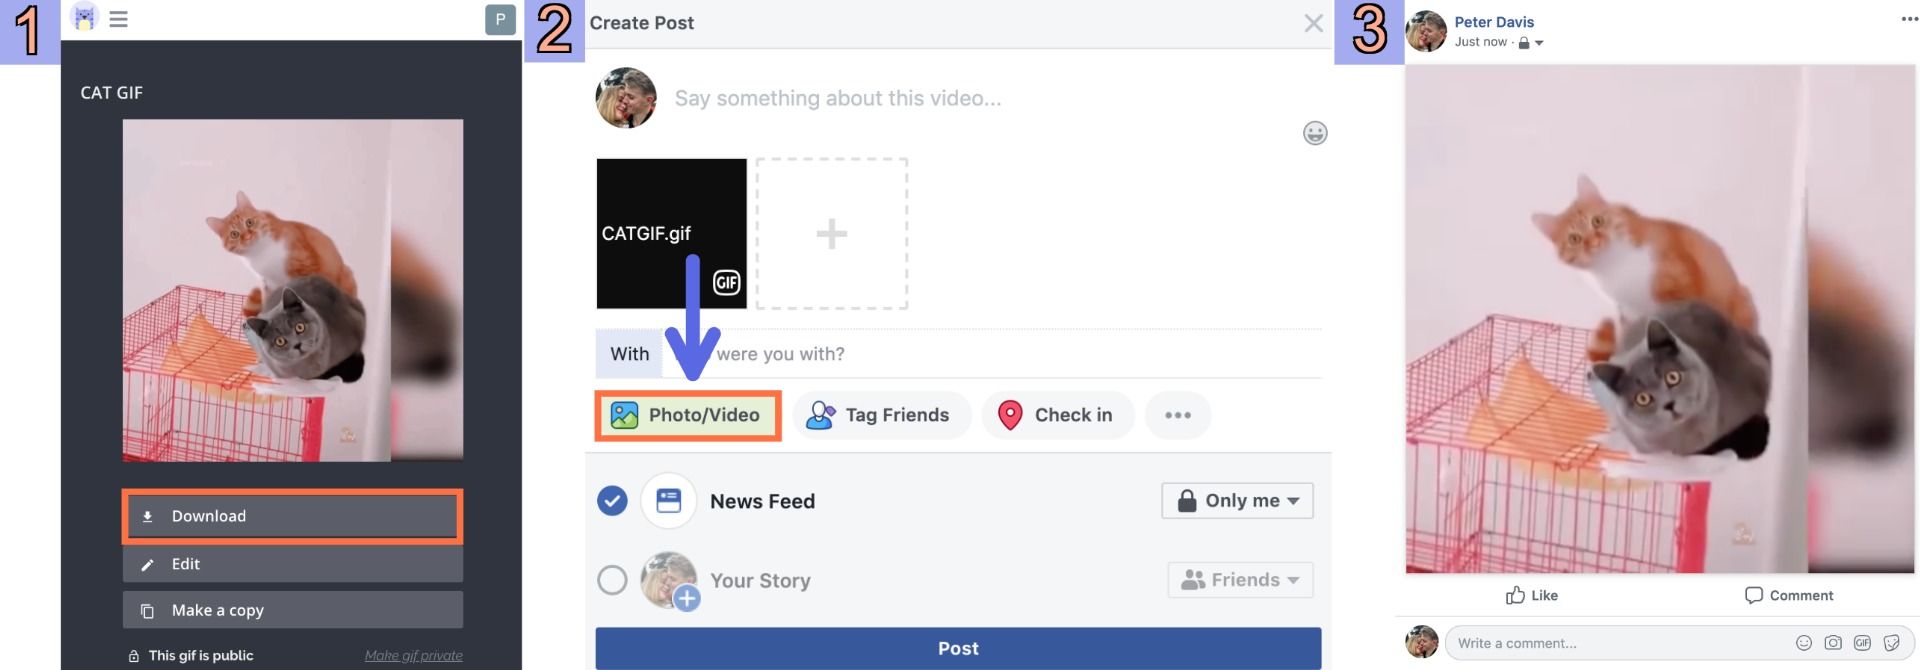 Screenshots showing how to post GIFs on Facebook.